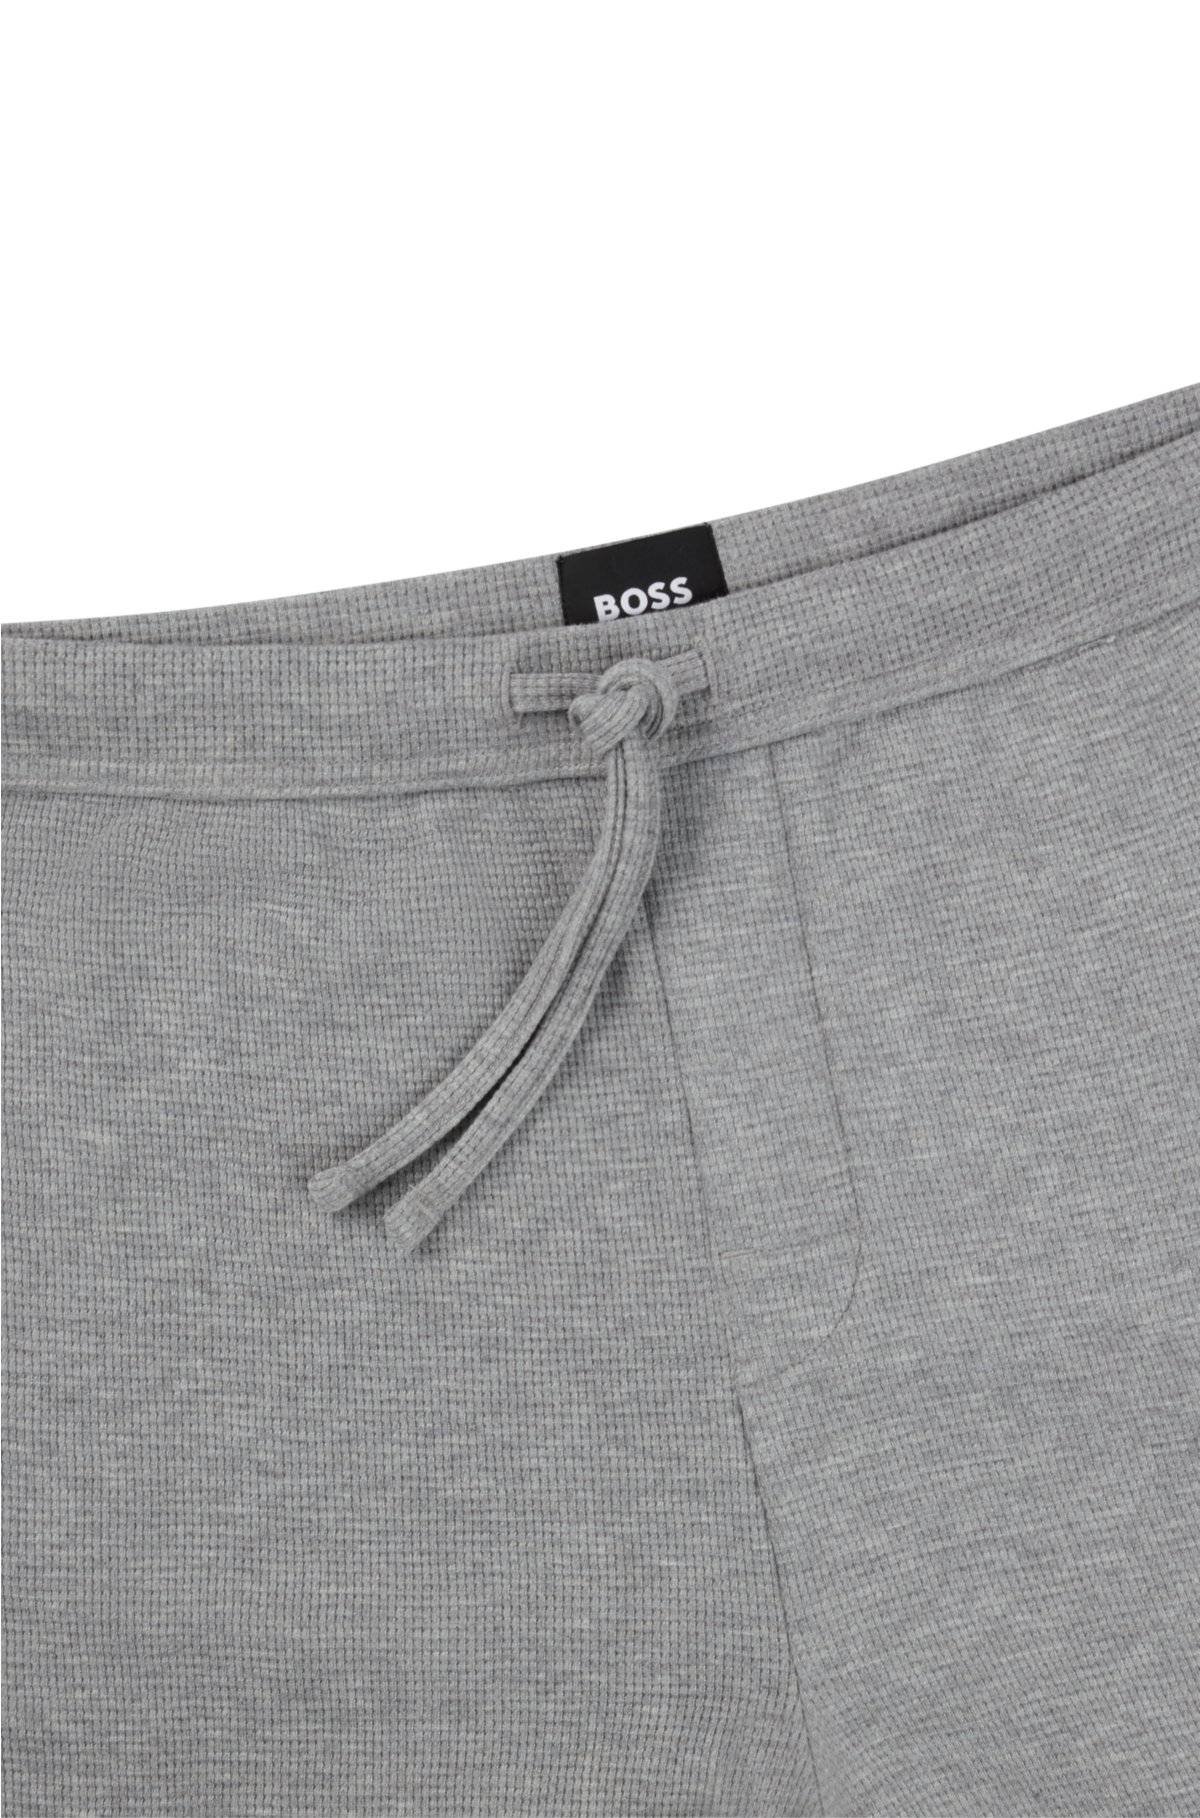 BOSS - with Pajama embroidered logo bottoms